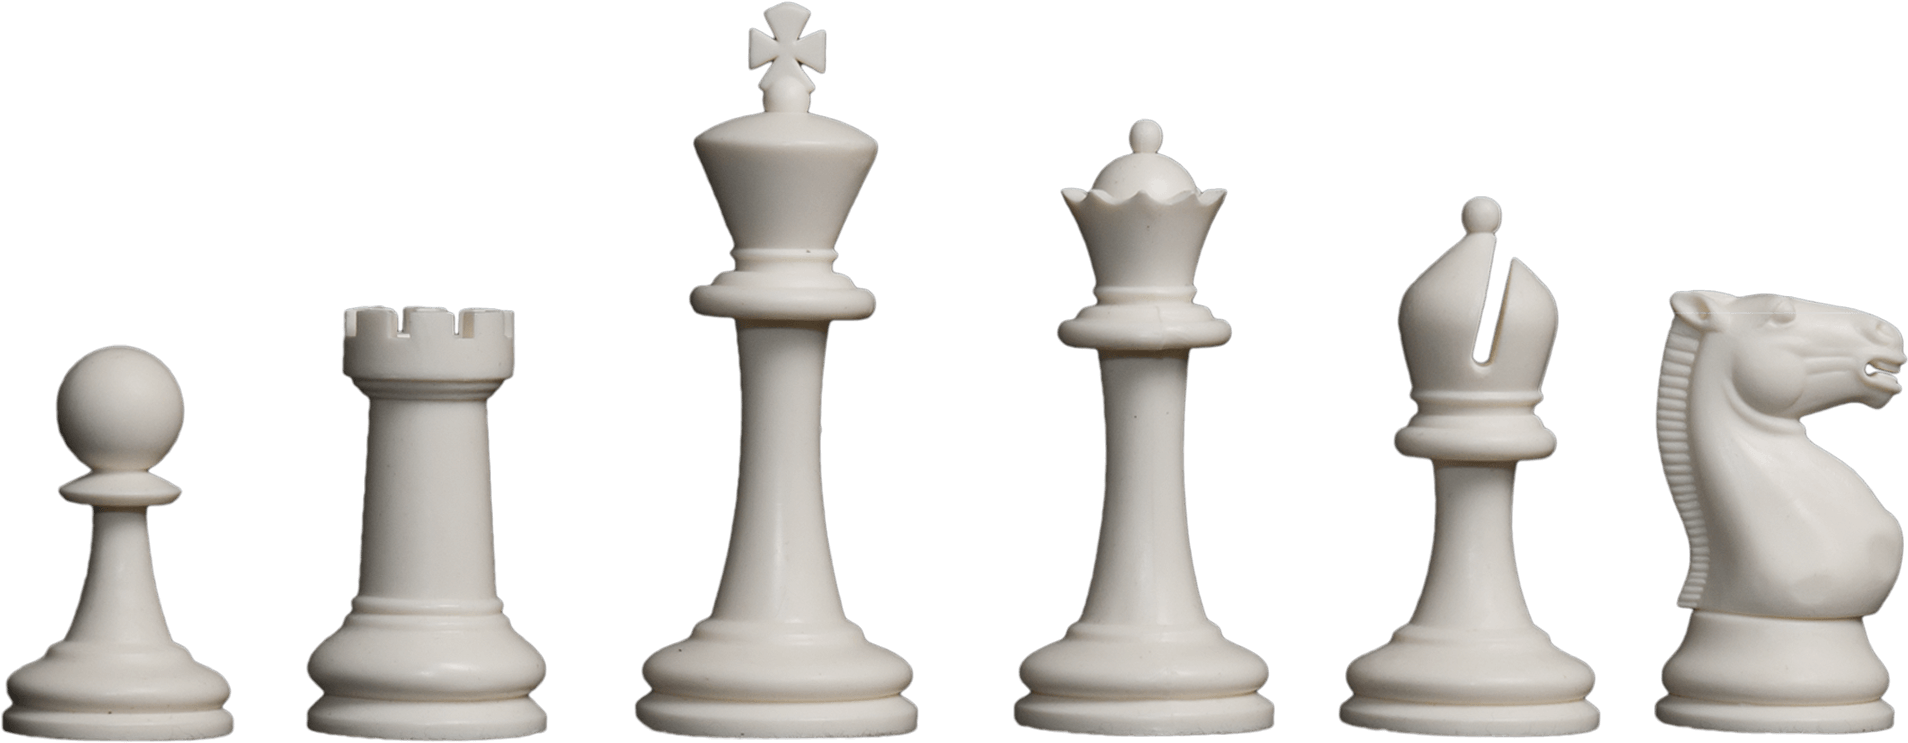 Chess Pieces Free Photo PNG Image